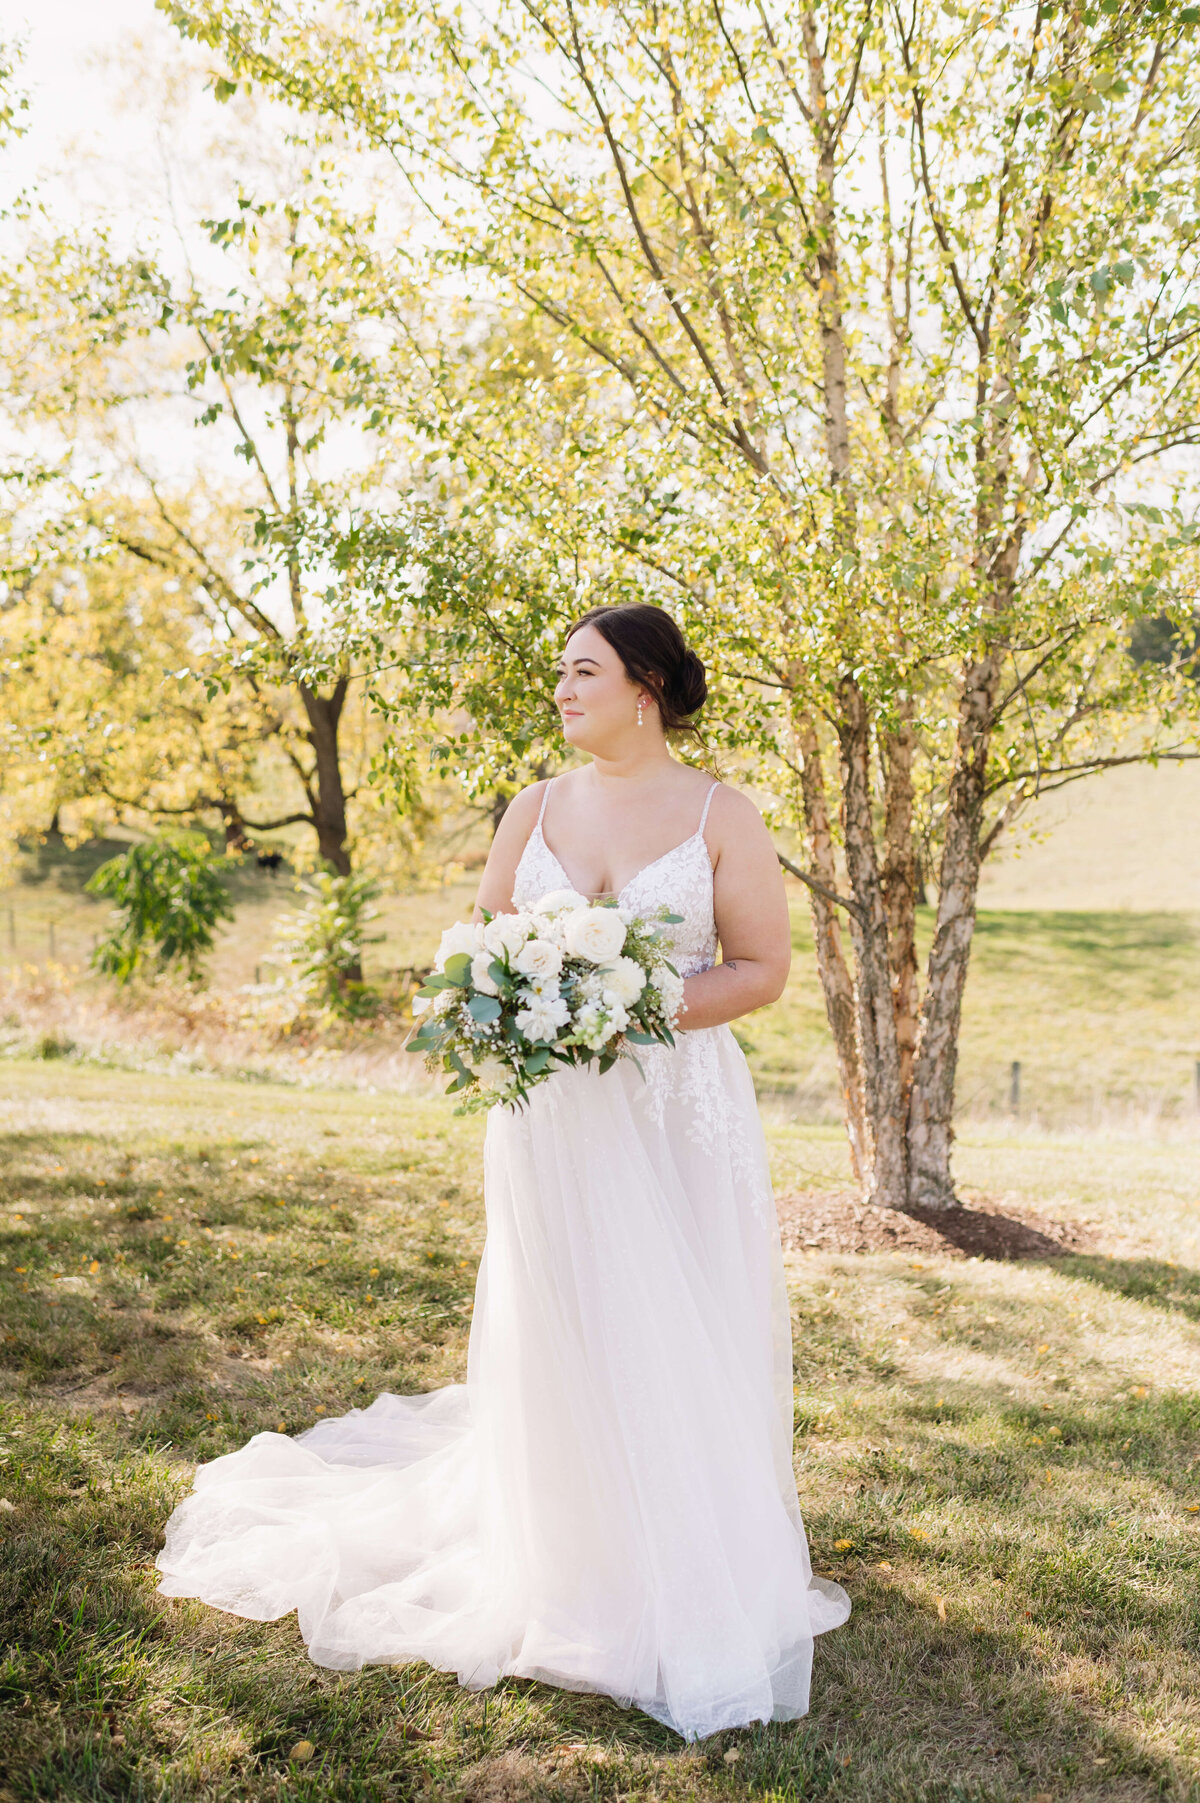 Charlottesville wedding photographer captures bridal photo of bride in a tulle wedding dress holding. awhite floral wedding bouquet with a forest behind her as she smiles over her shoulder